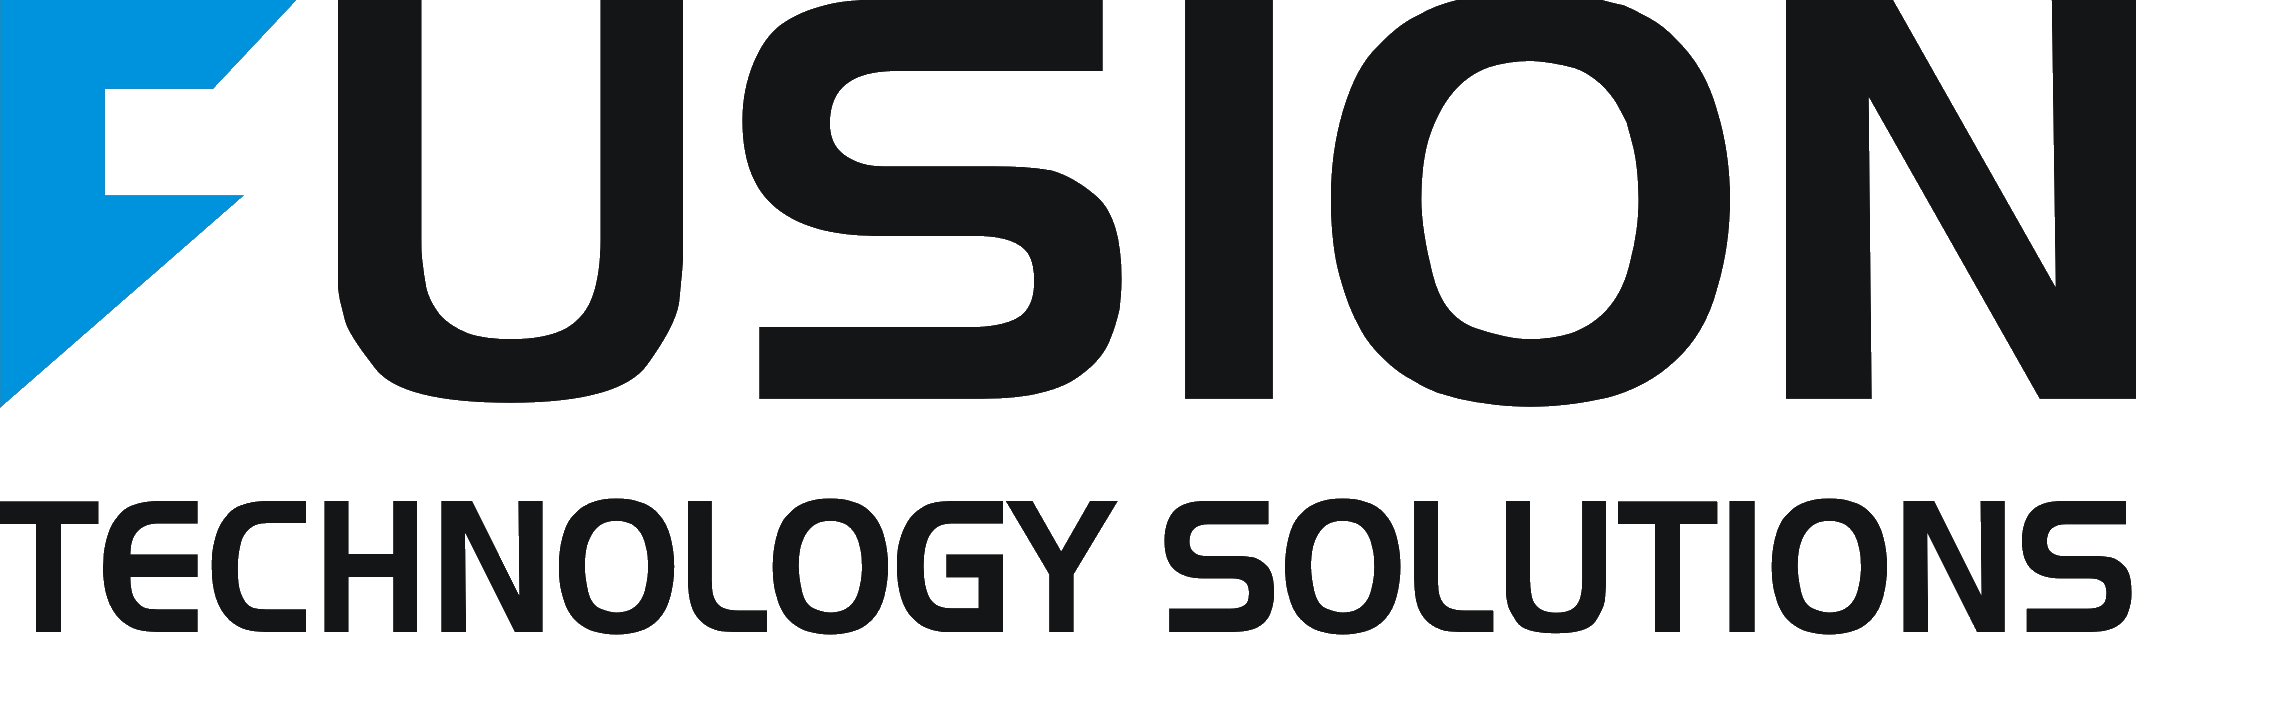 ry USION

TECHNOLOGY SOLUTIONS